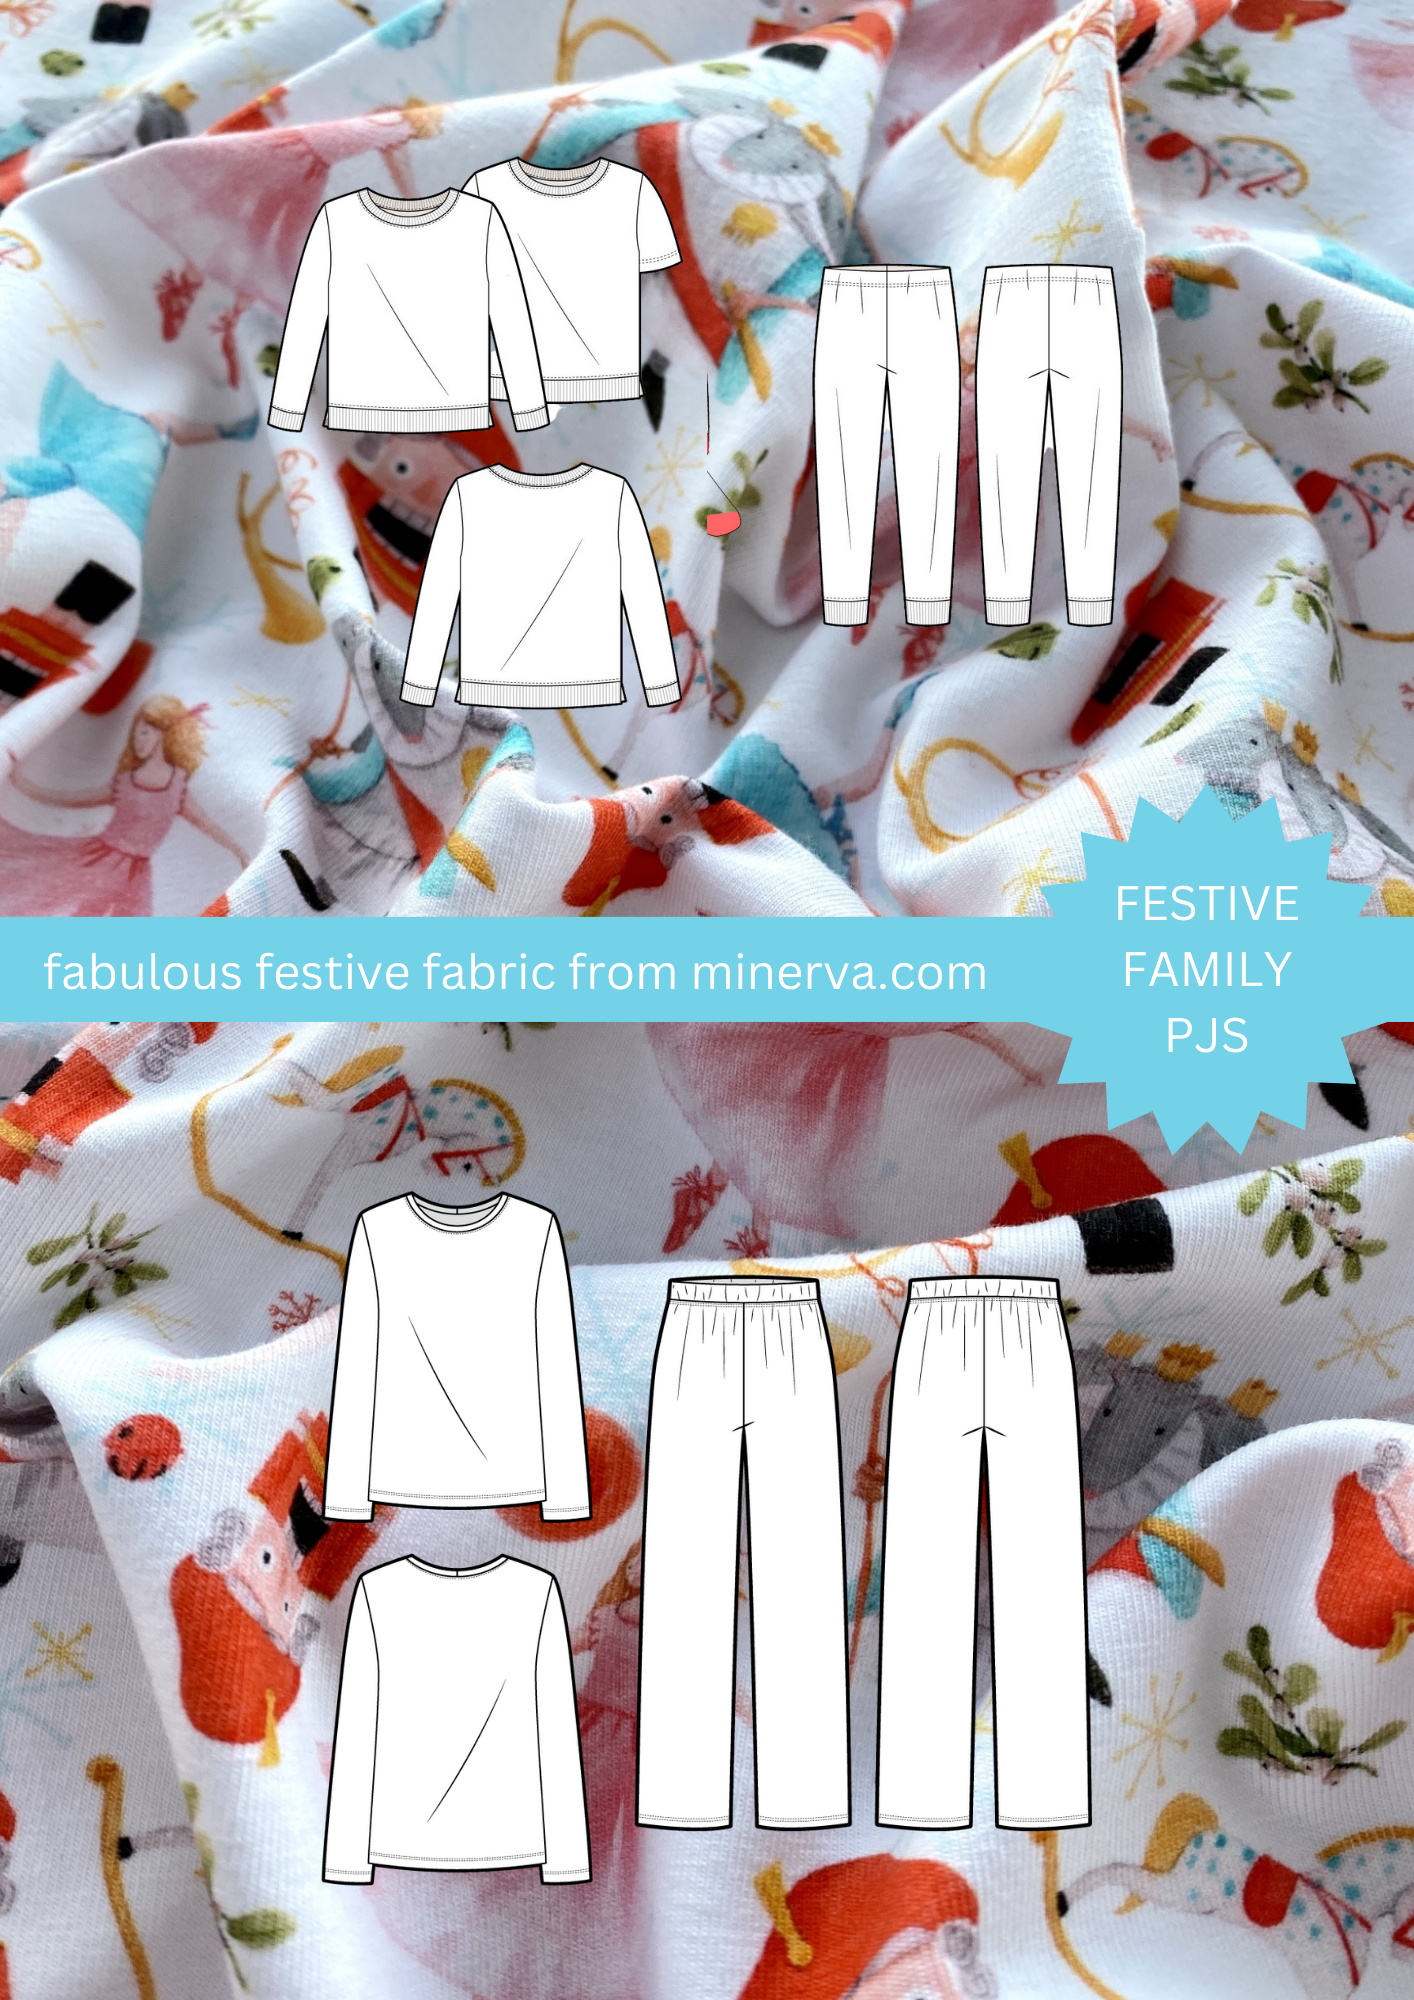 Make you and your family some festive PJs with gorgeous Christmas themed jersey fabric from Minerva!